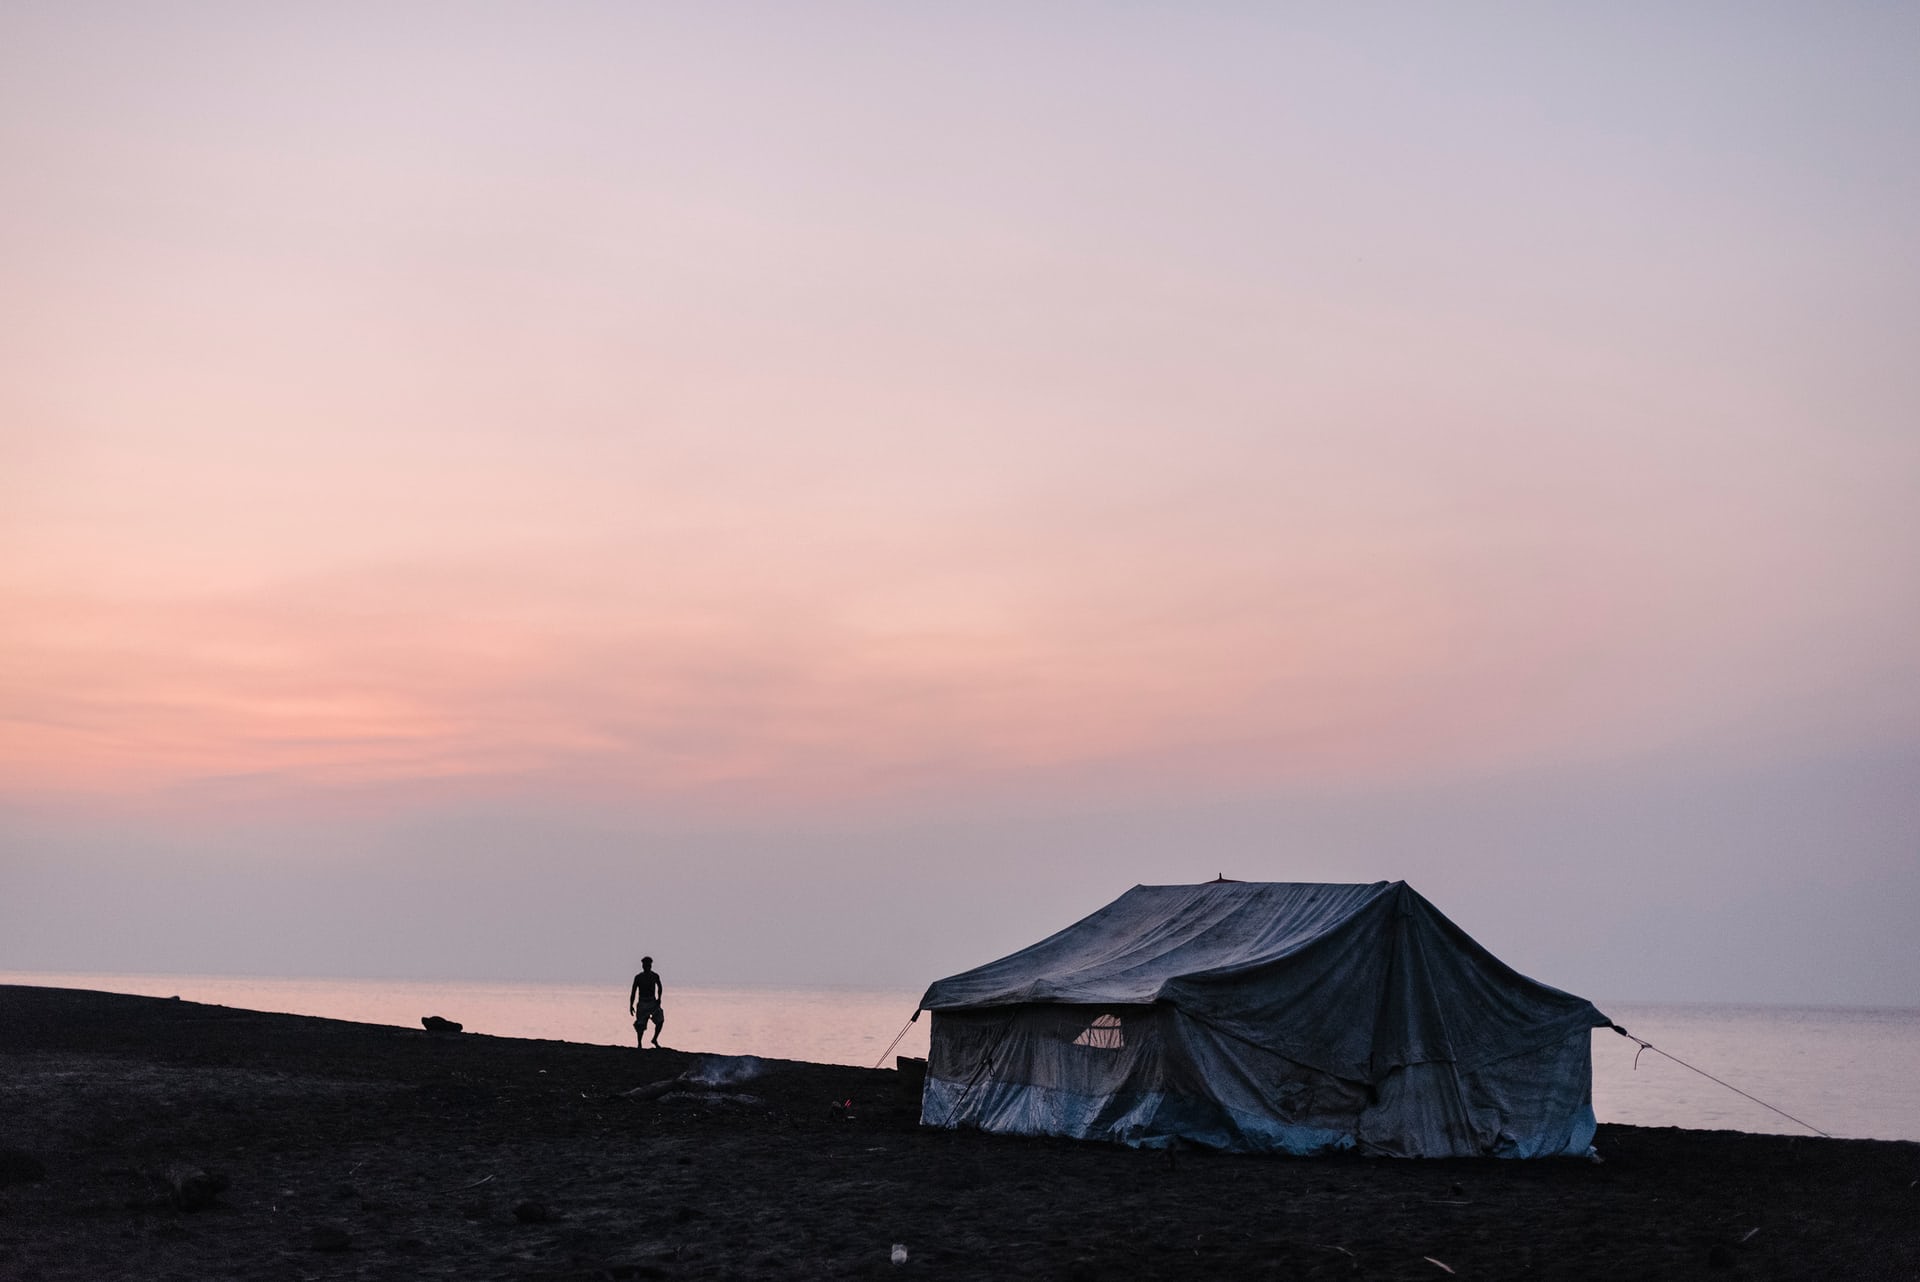 A man watches the sun set over Ambae Island. Communities from villages in the mountain were provided with tents for temporary housing when they evacuated to safer ground along the coastline in April due to volcanic activity. Photograph: Alana Holmberg for the Guardian